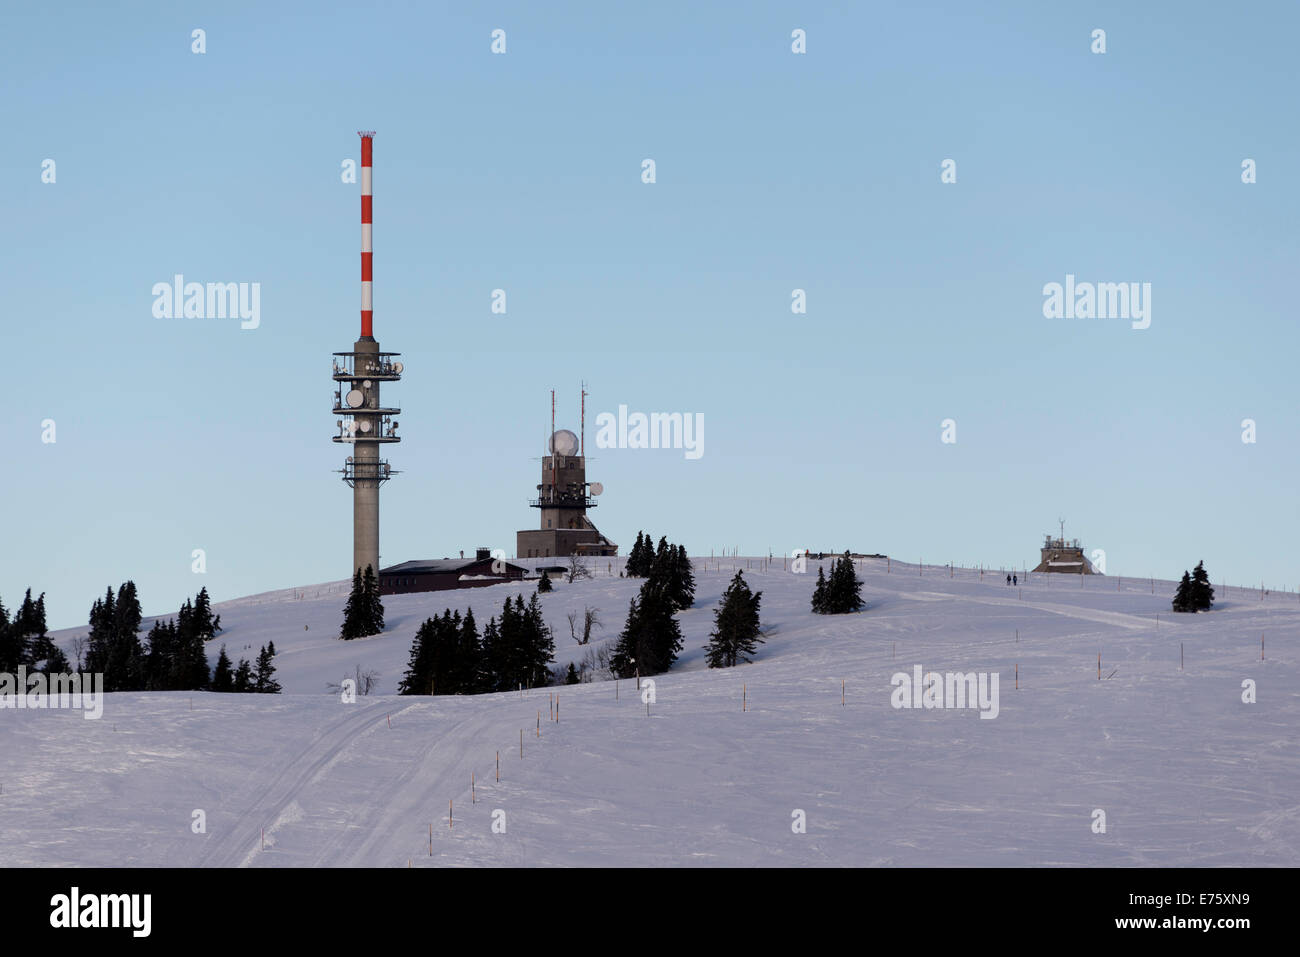 Summit of Feldberg Mountain with a radio tower and a weather station, Feldberg, Black Forest, Baden-Württemberg, Germany Stock Photo